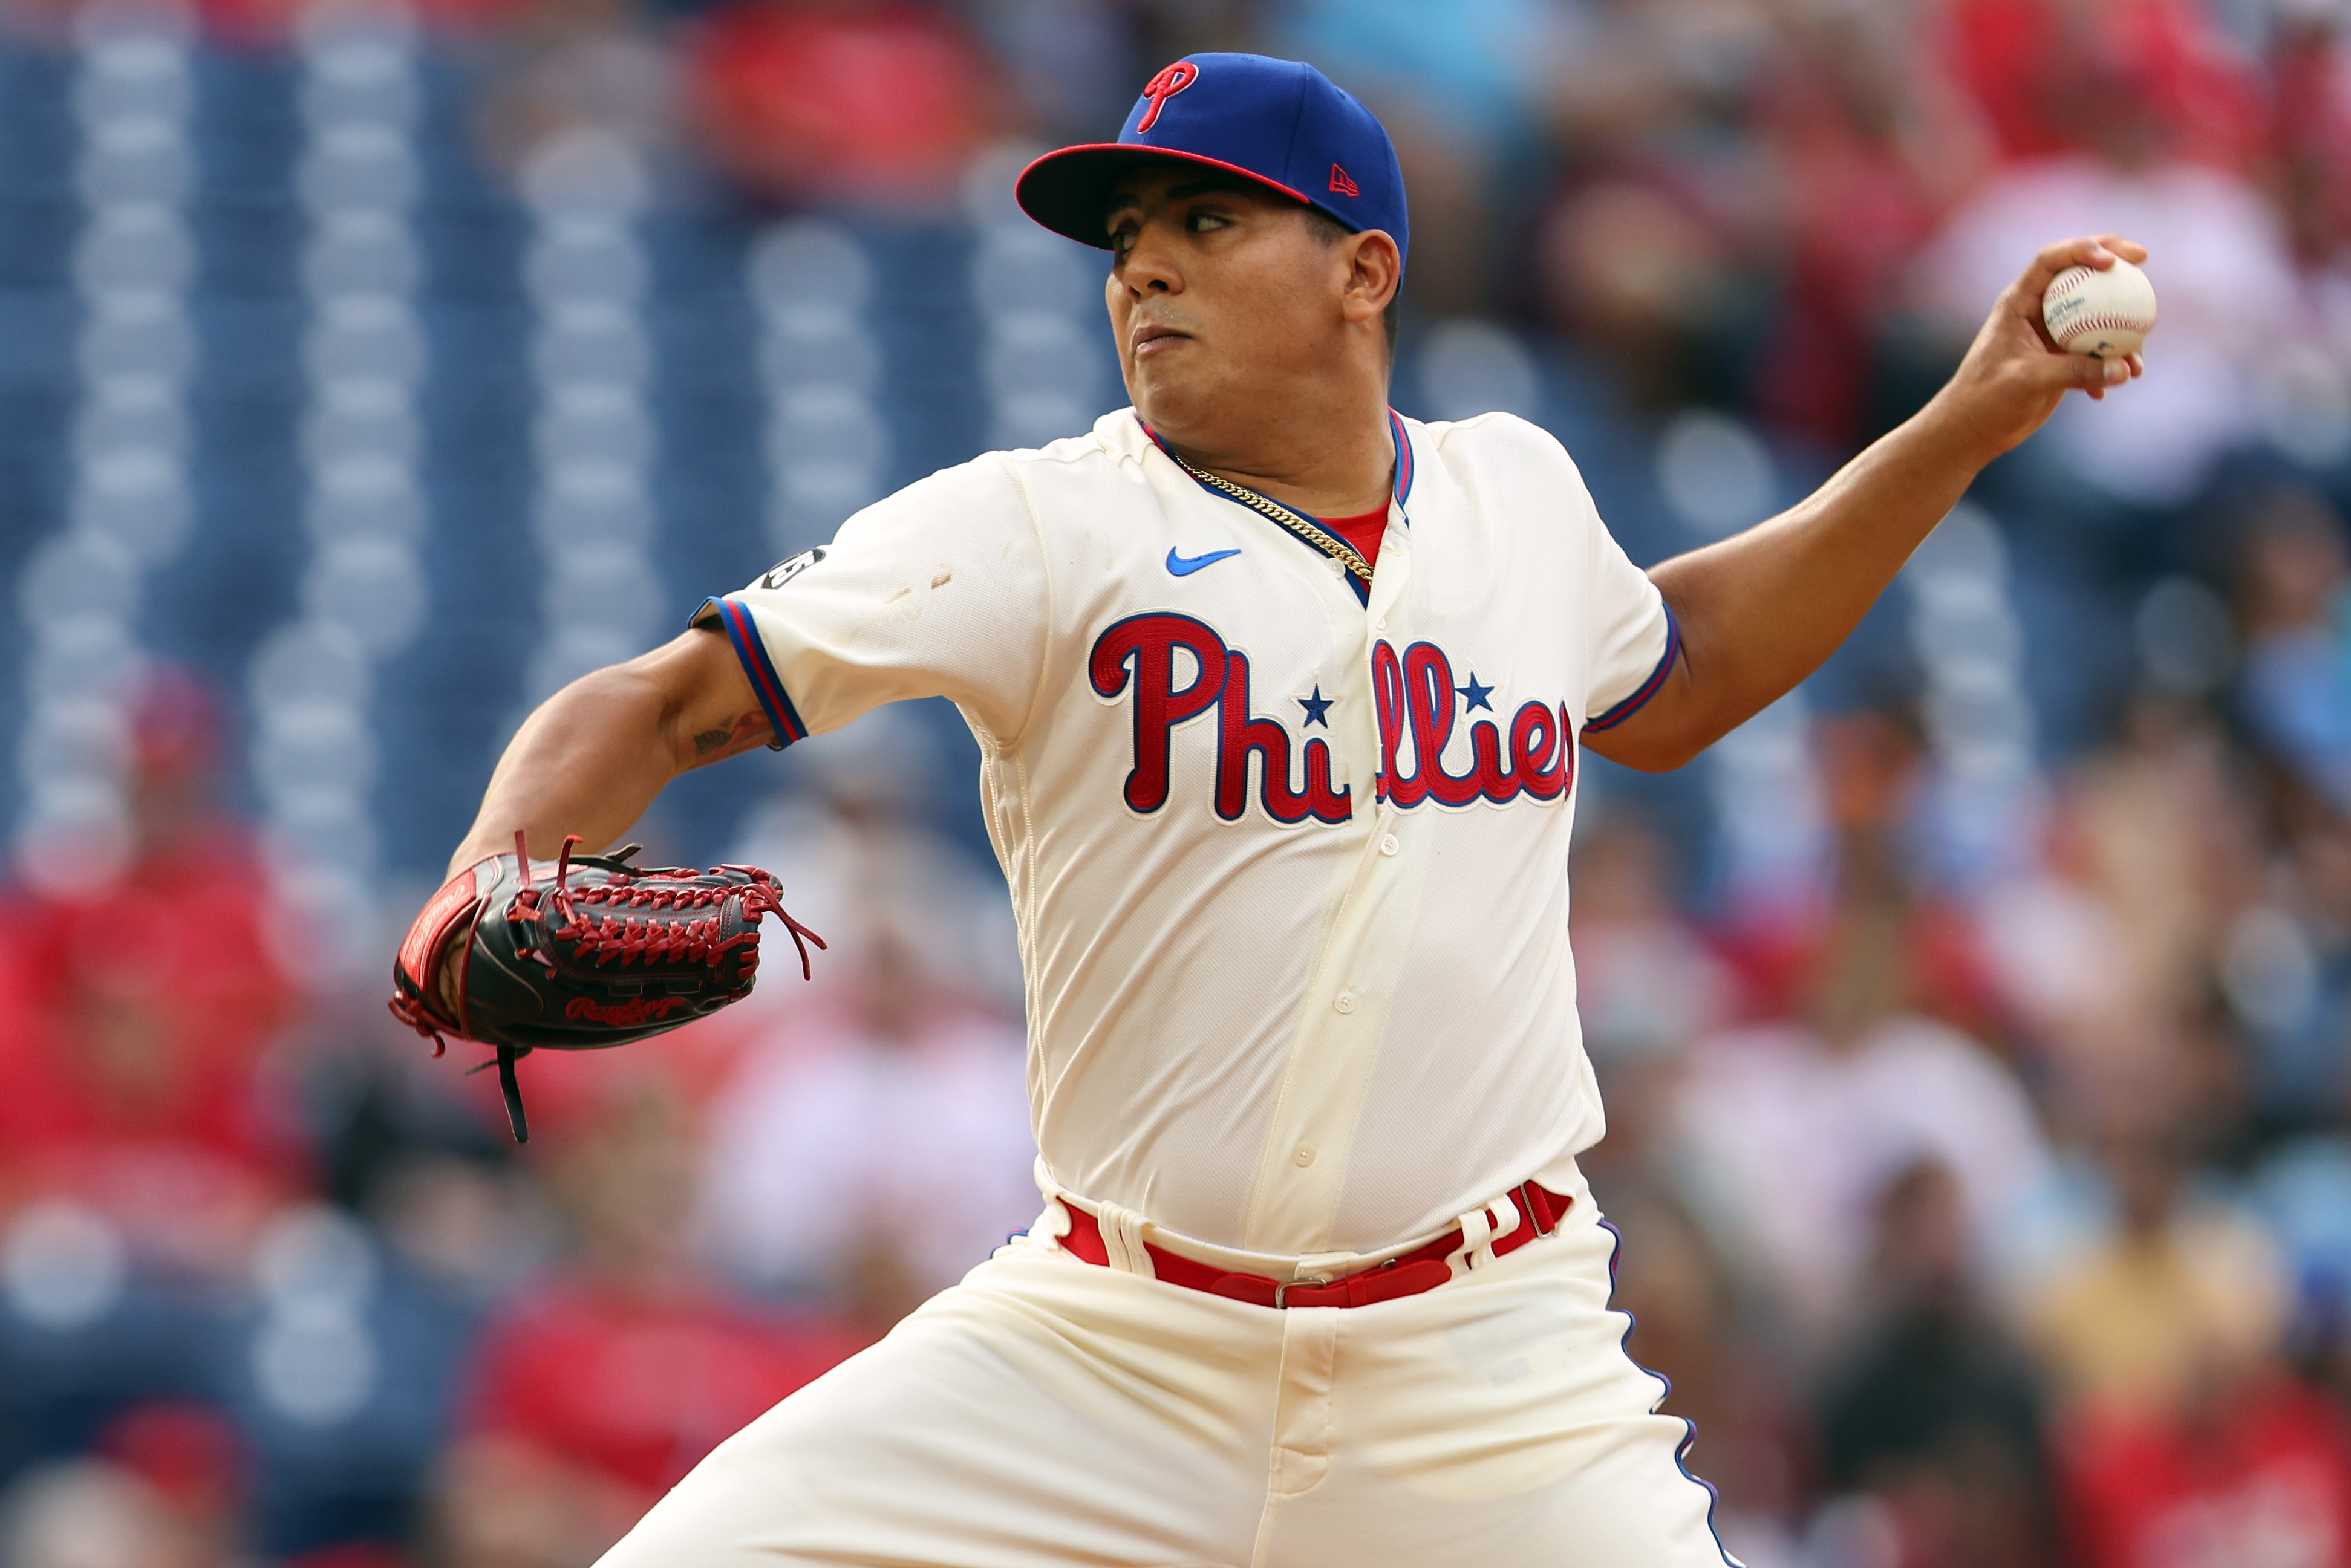 Ranger Suarez tops players in World Series Game 3, as Phillies